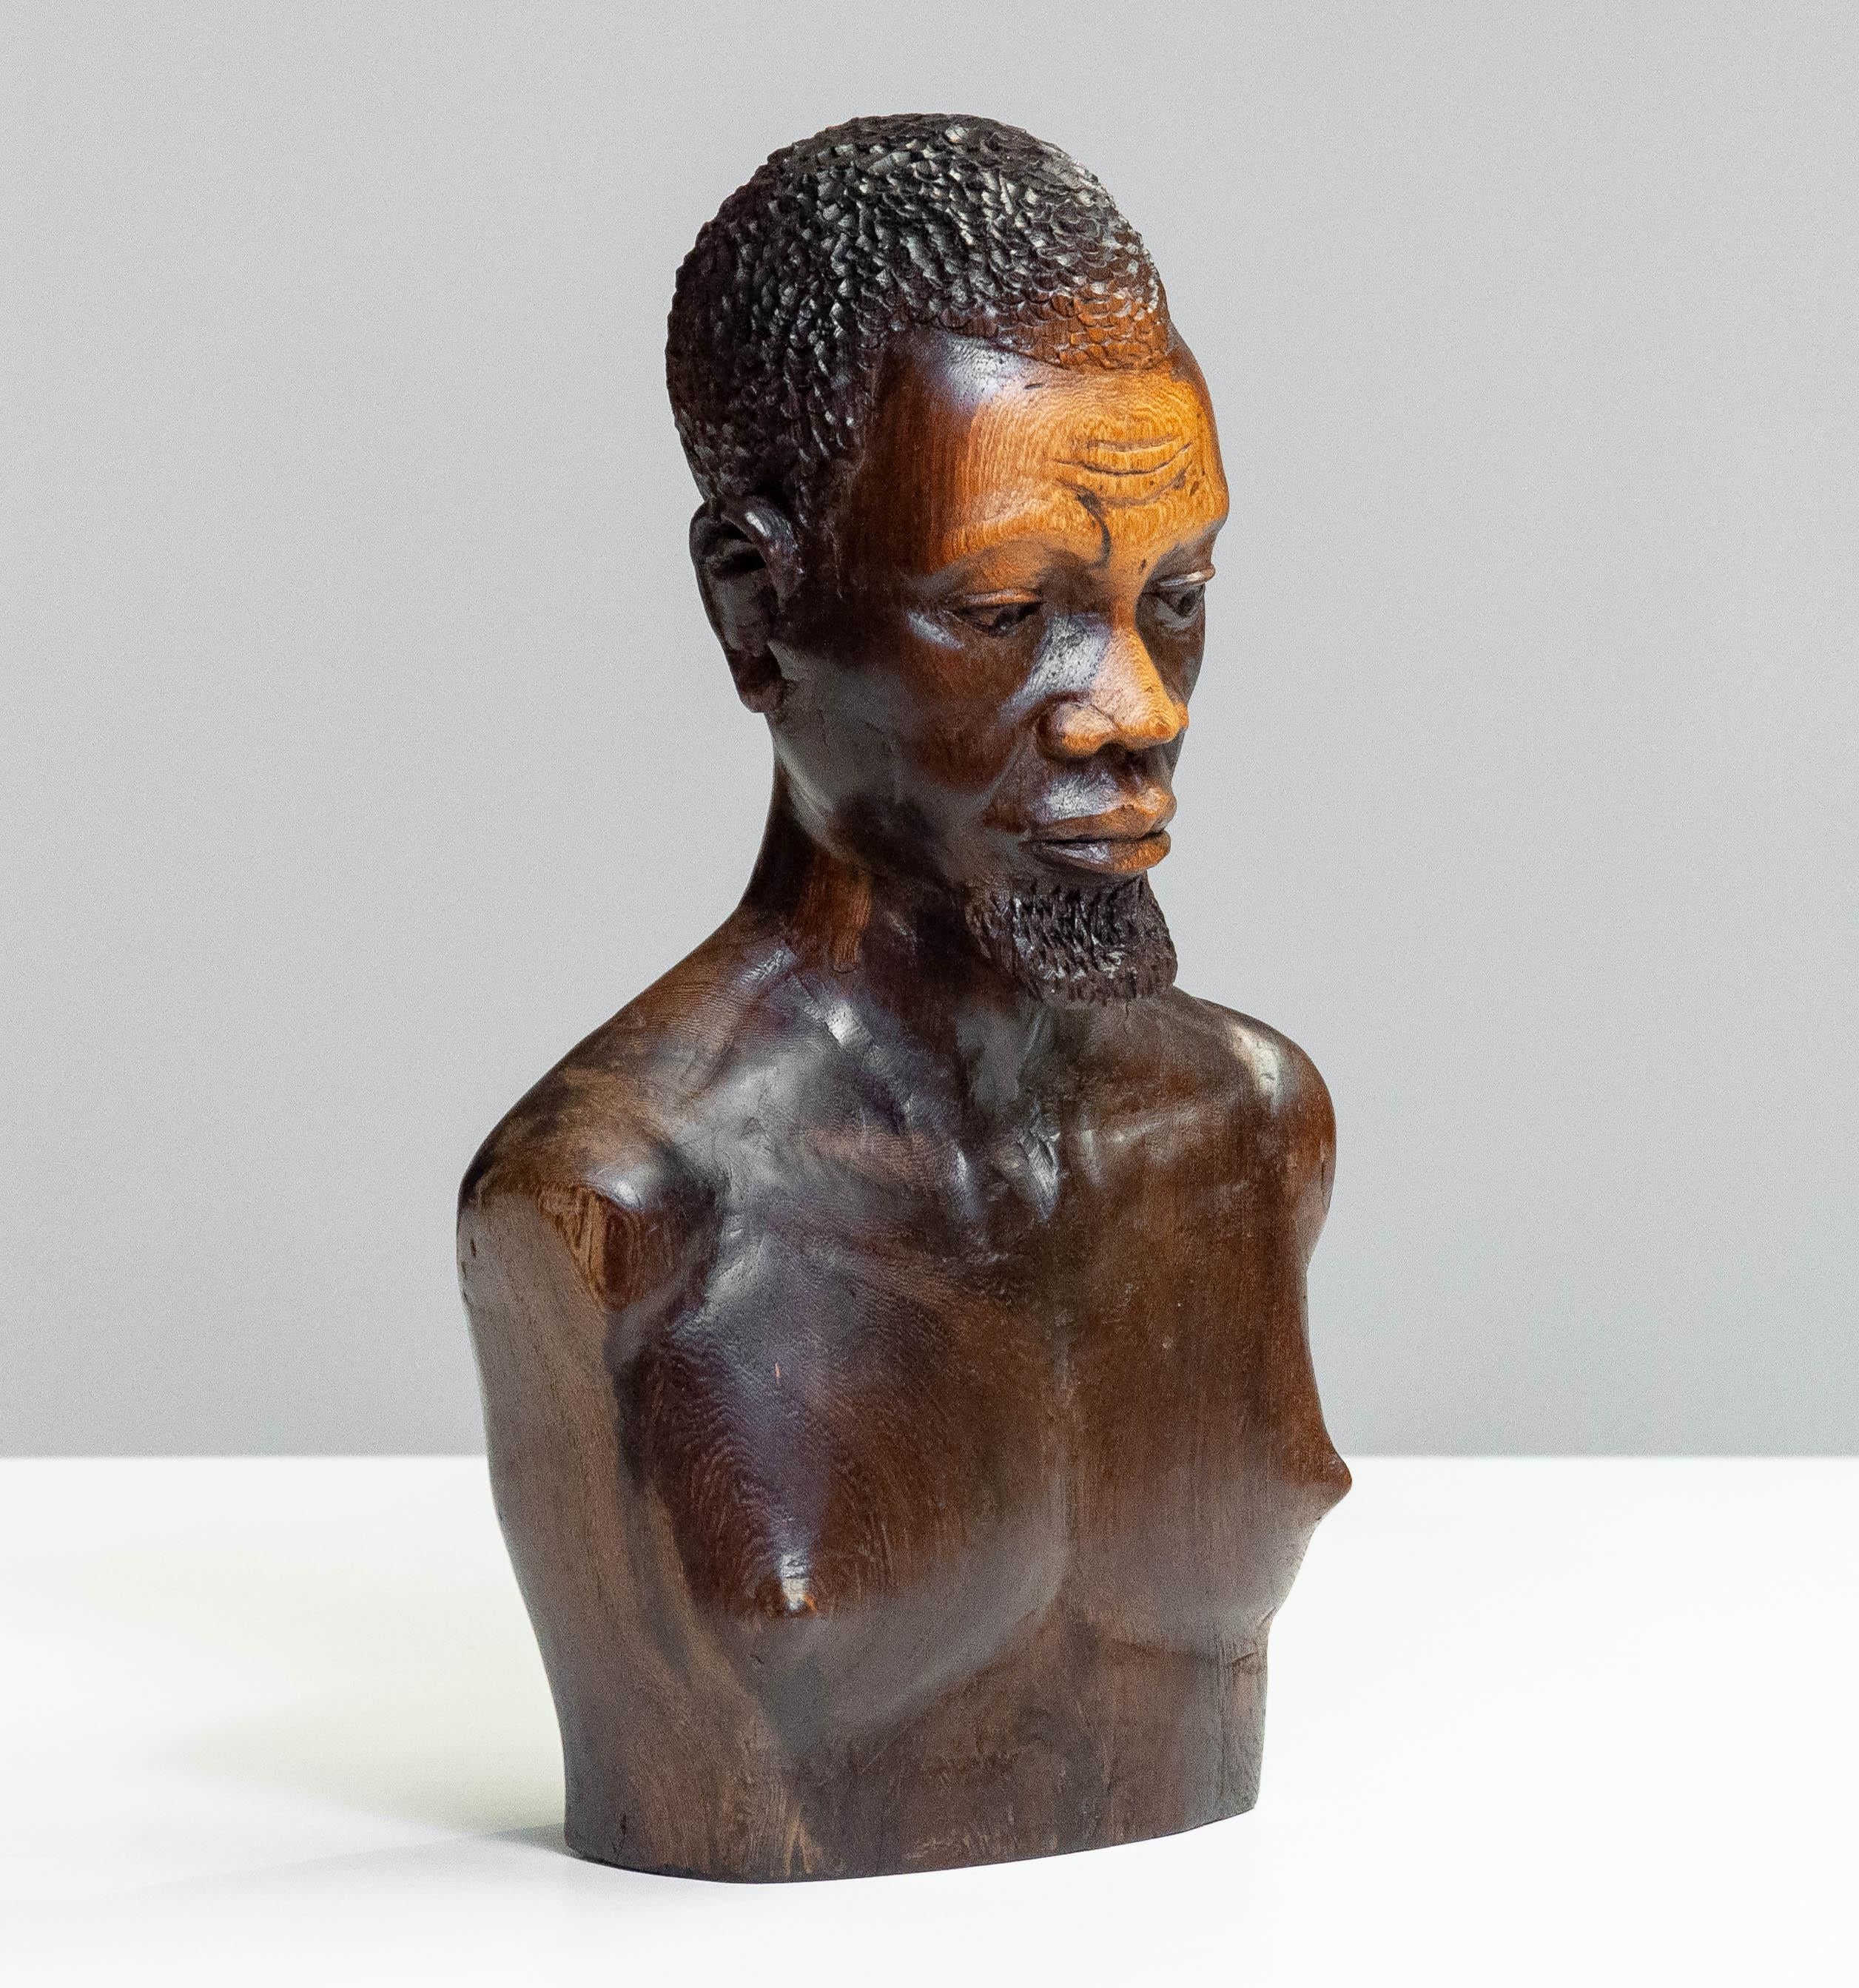 African sculpture / bust of a man with beard carved out of a beautiful piece of palissander.
Very detailed and in correct proportions made.